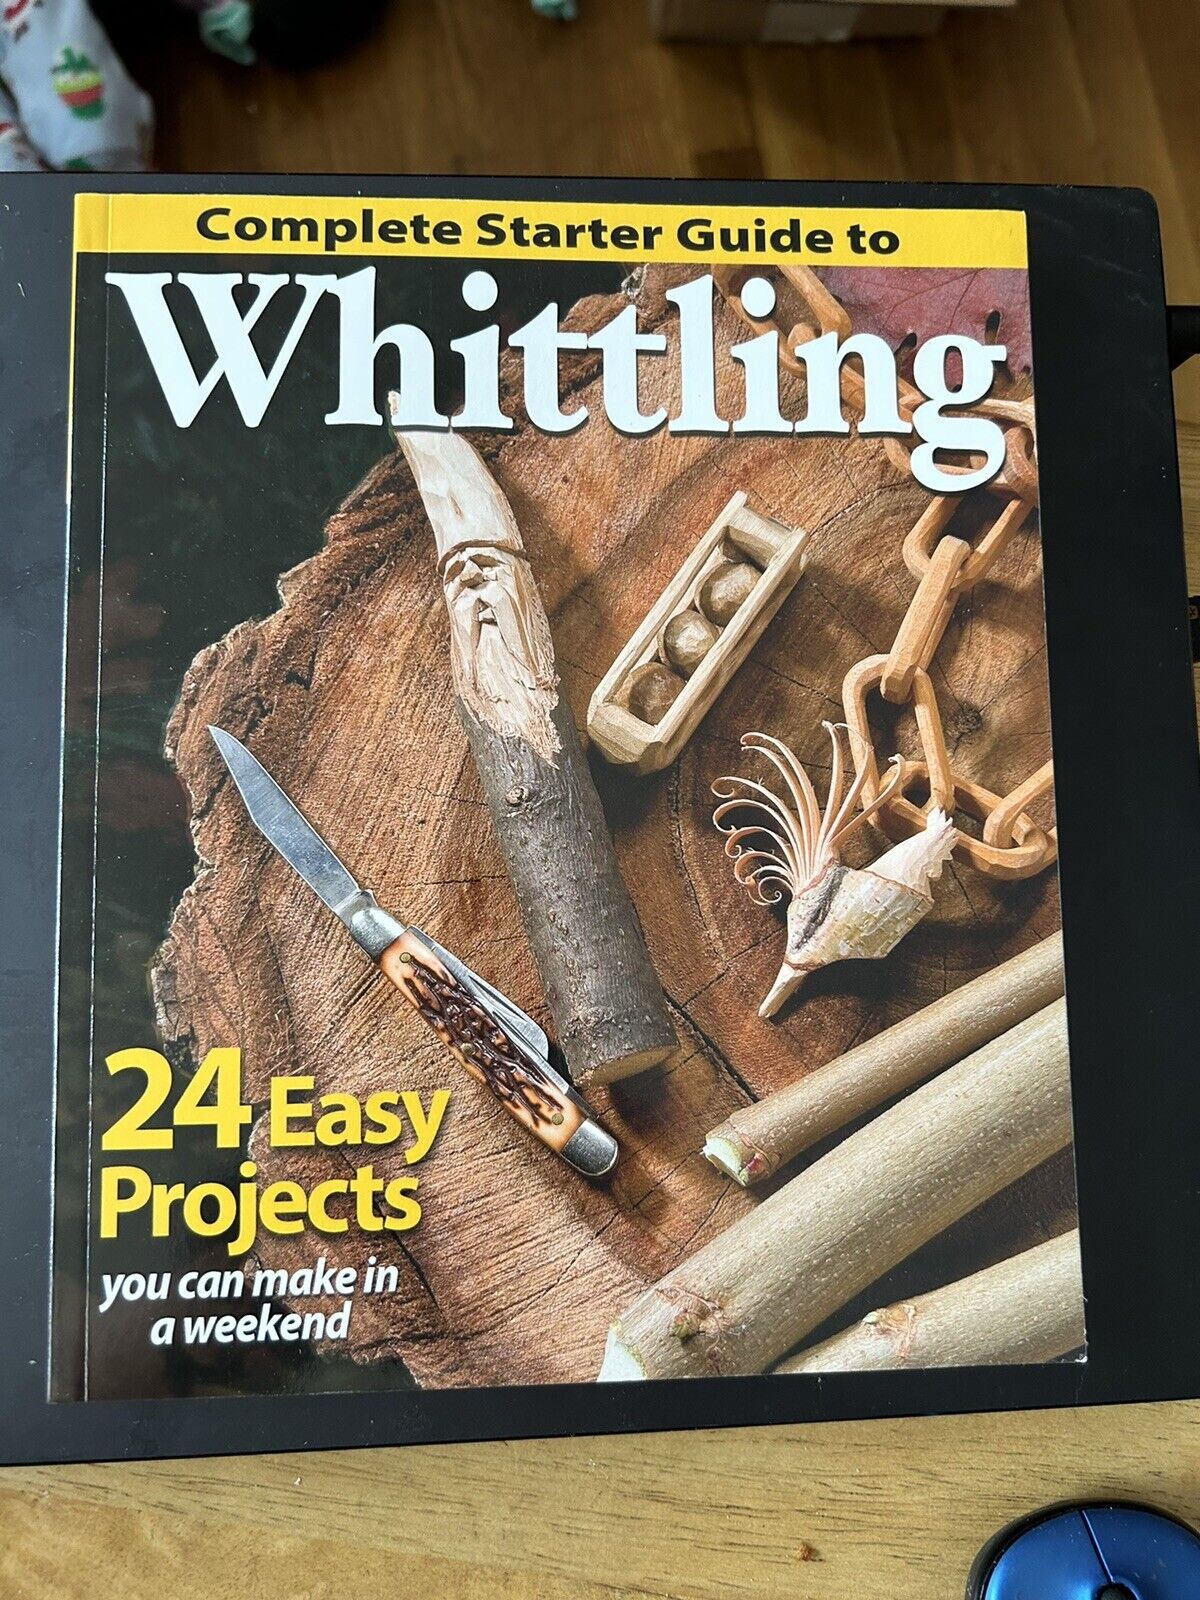 Boy Scout/Girl Scout/Sea Scout/Explorer: Complete Starter Guide to Whittling